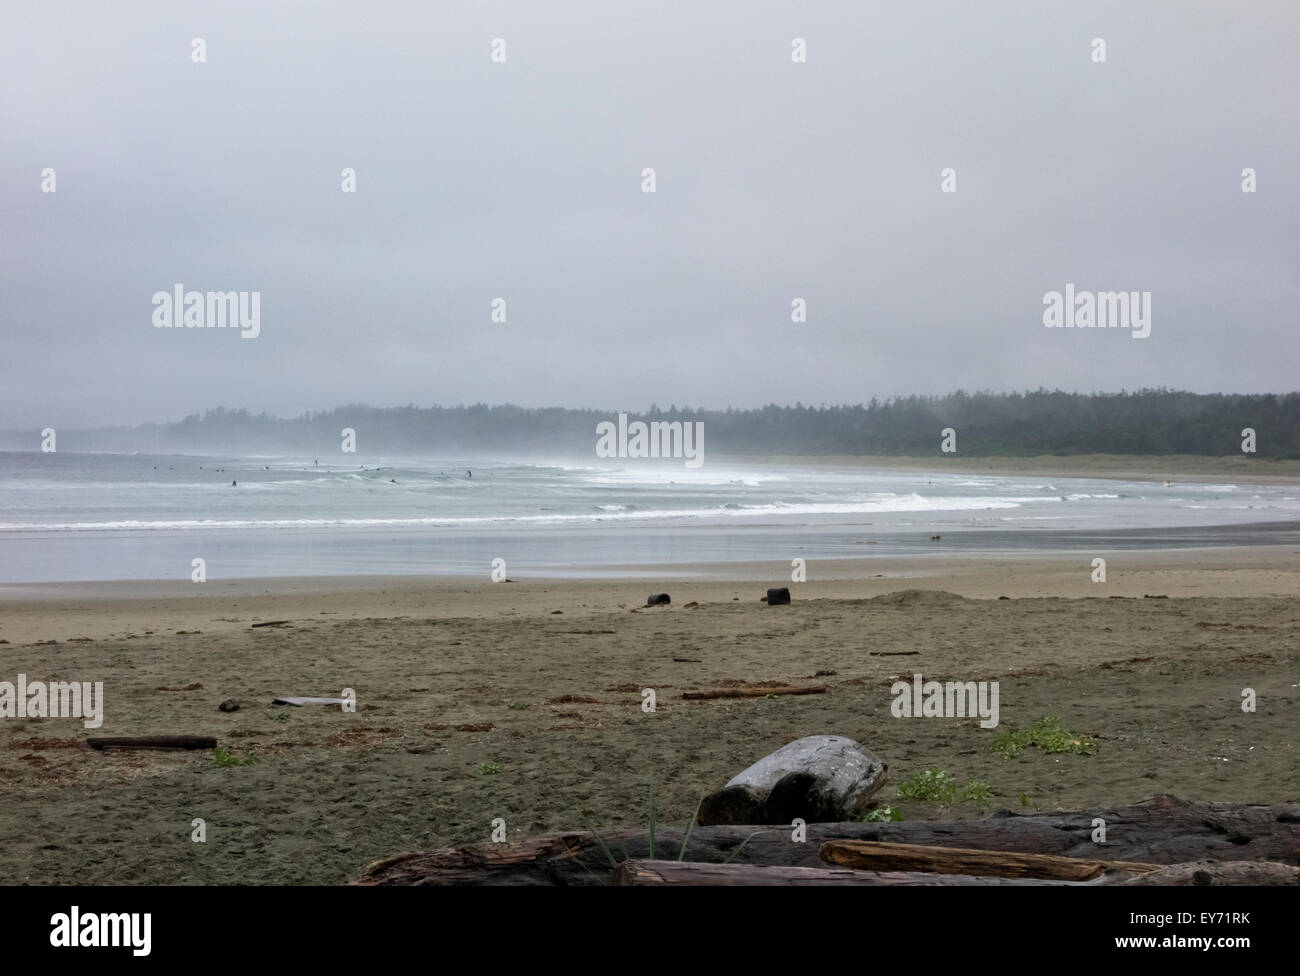 Surfers and stand up paddle boarders in the stormy misty ocean on a rainy afternoon at Long Beach on Vancouver Island, BC. Stock Photo